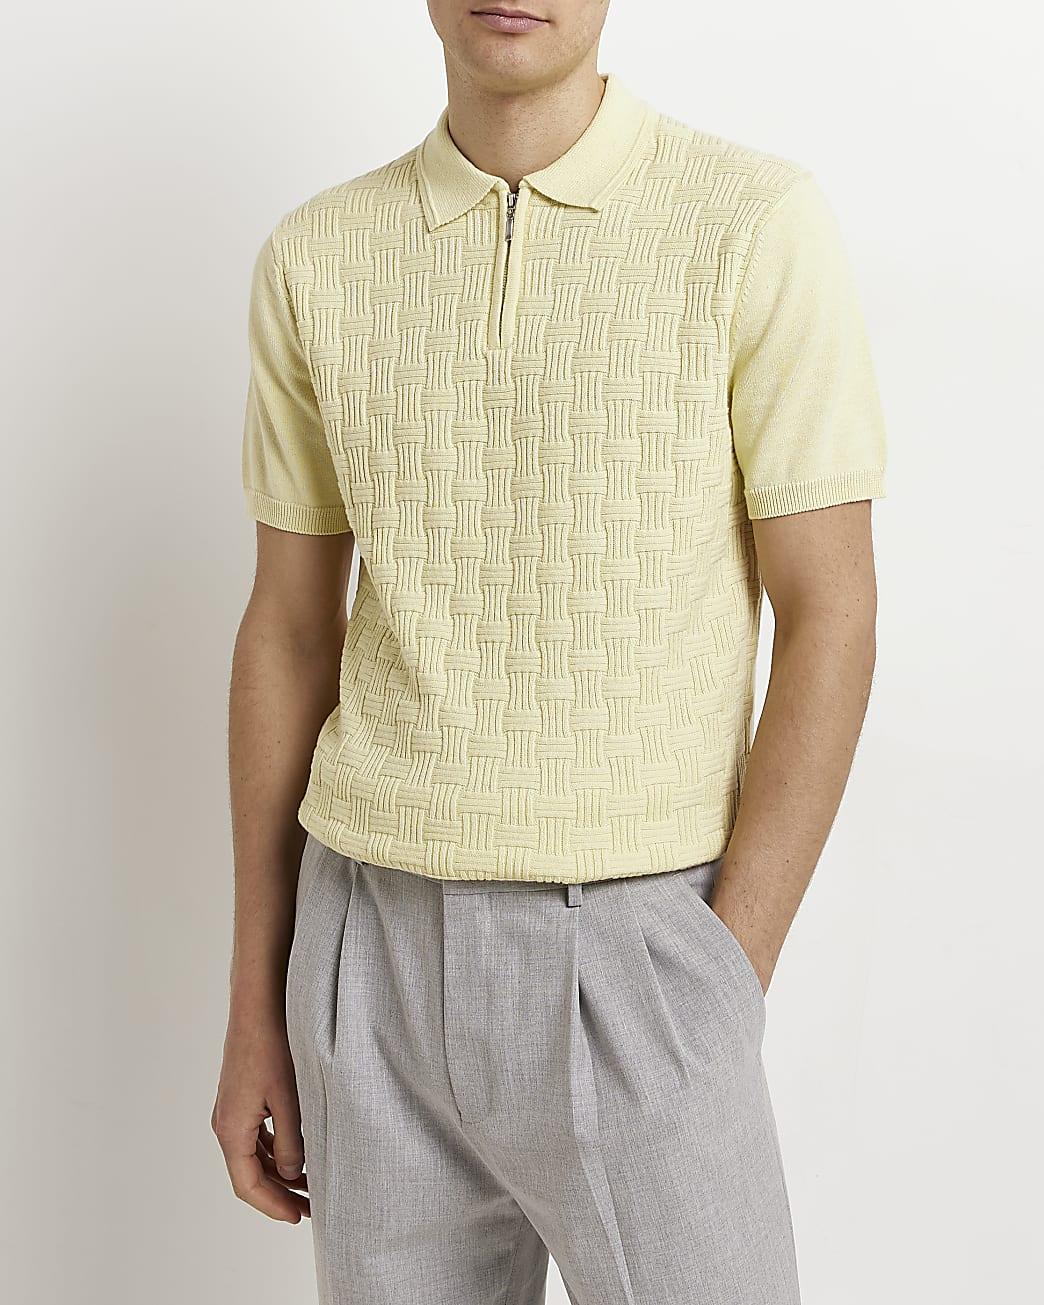 River Island Slim Fit Textured Knit Polo Shirt in Yellow for Men